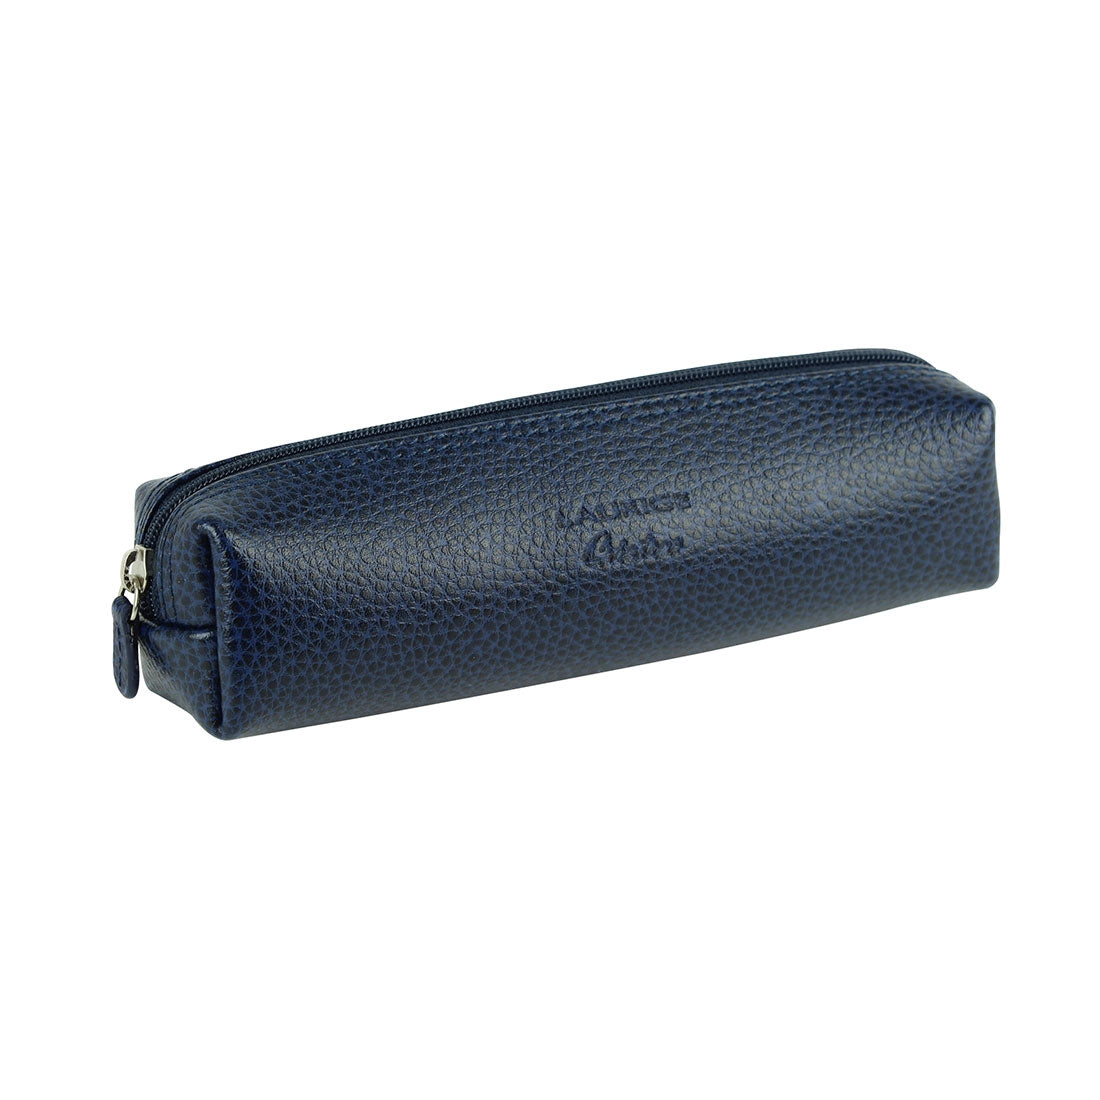 Square Pen Holder - Navy#color_laurige-navy